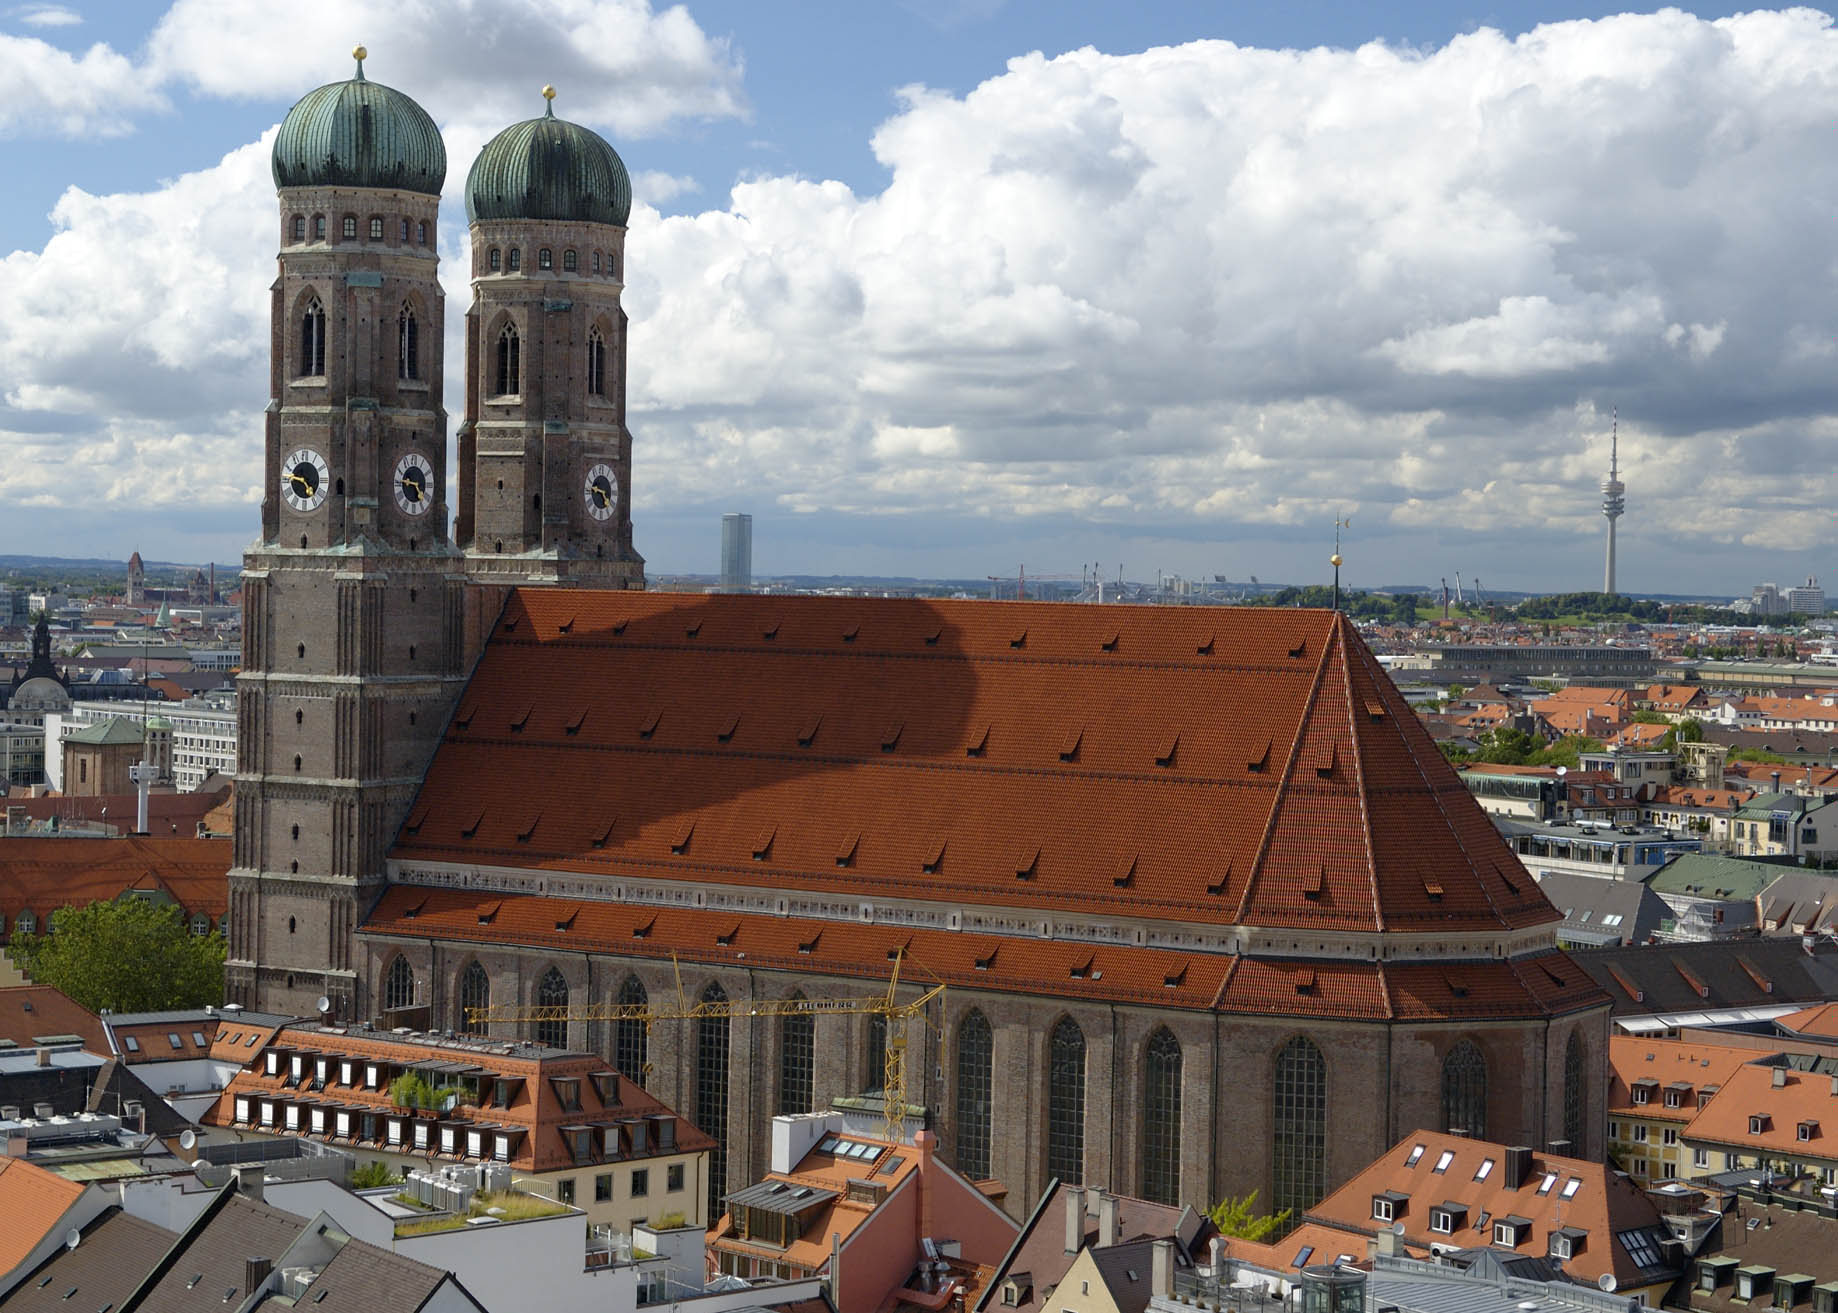 Church of Our Lady - Top 10 Things to See and Do in Munich, Germany